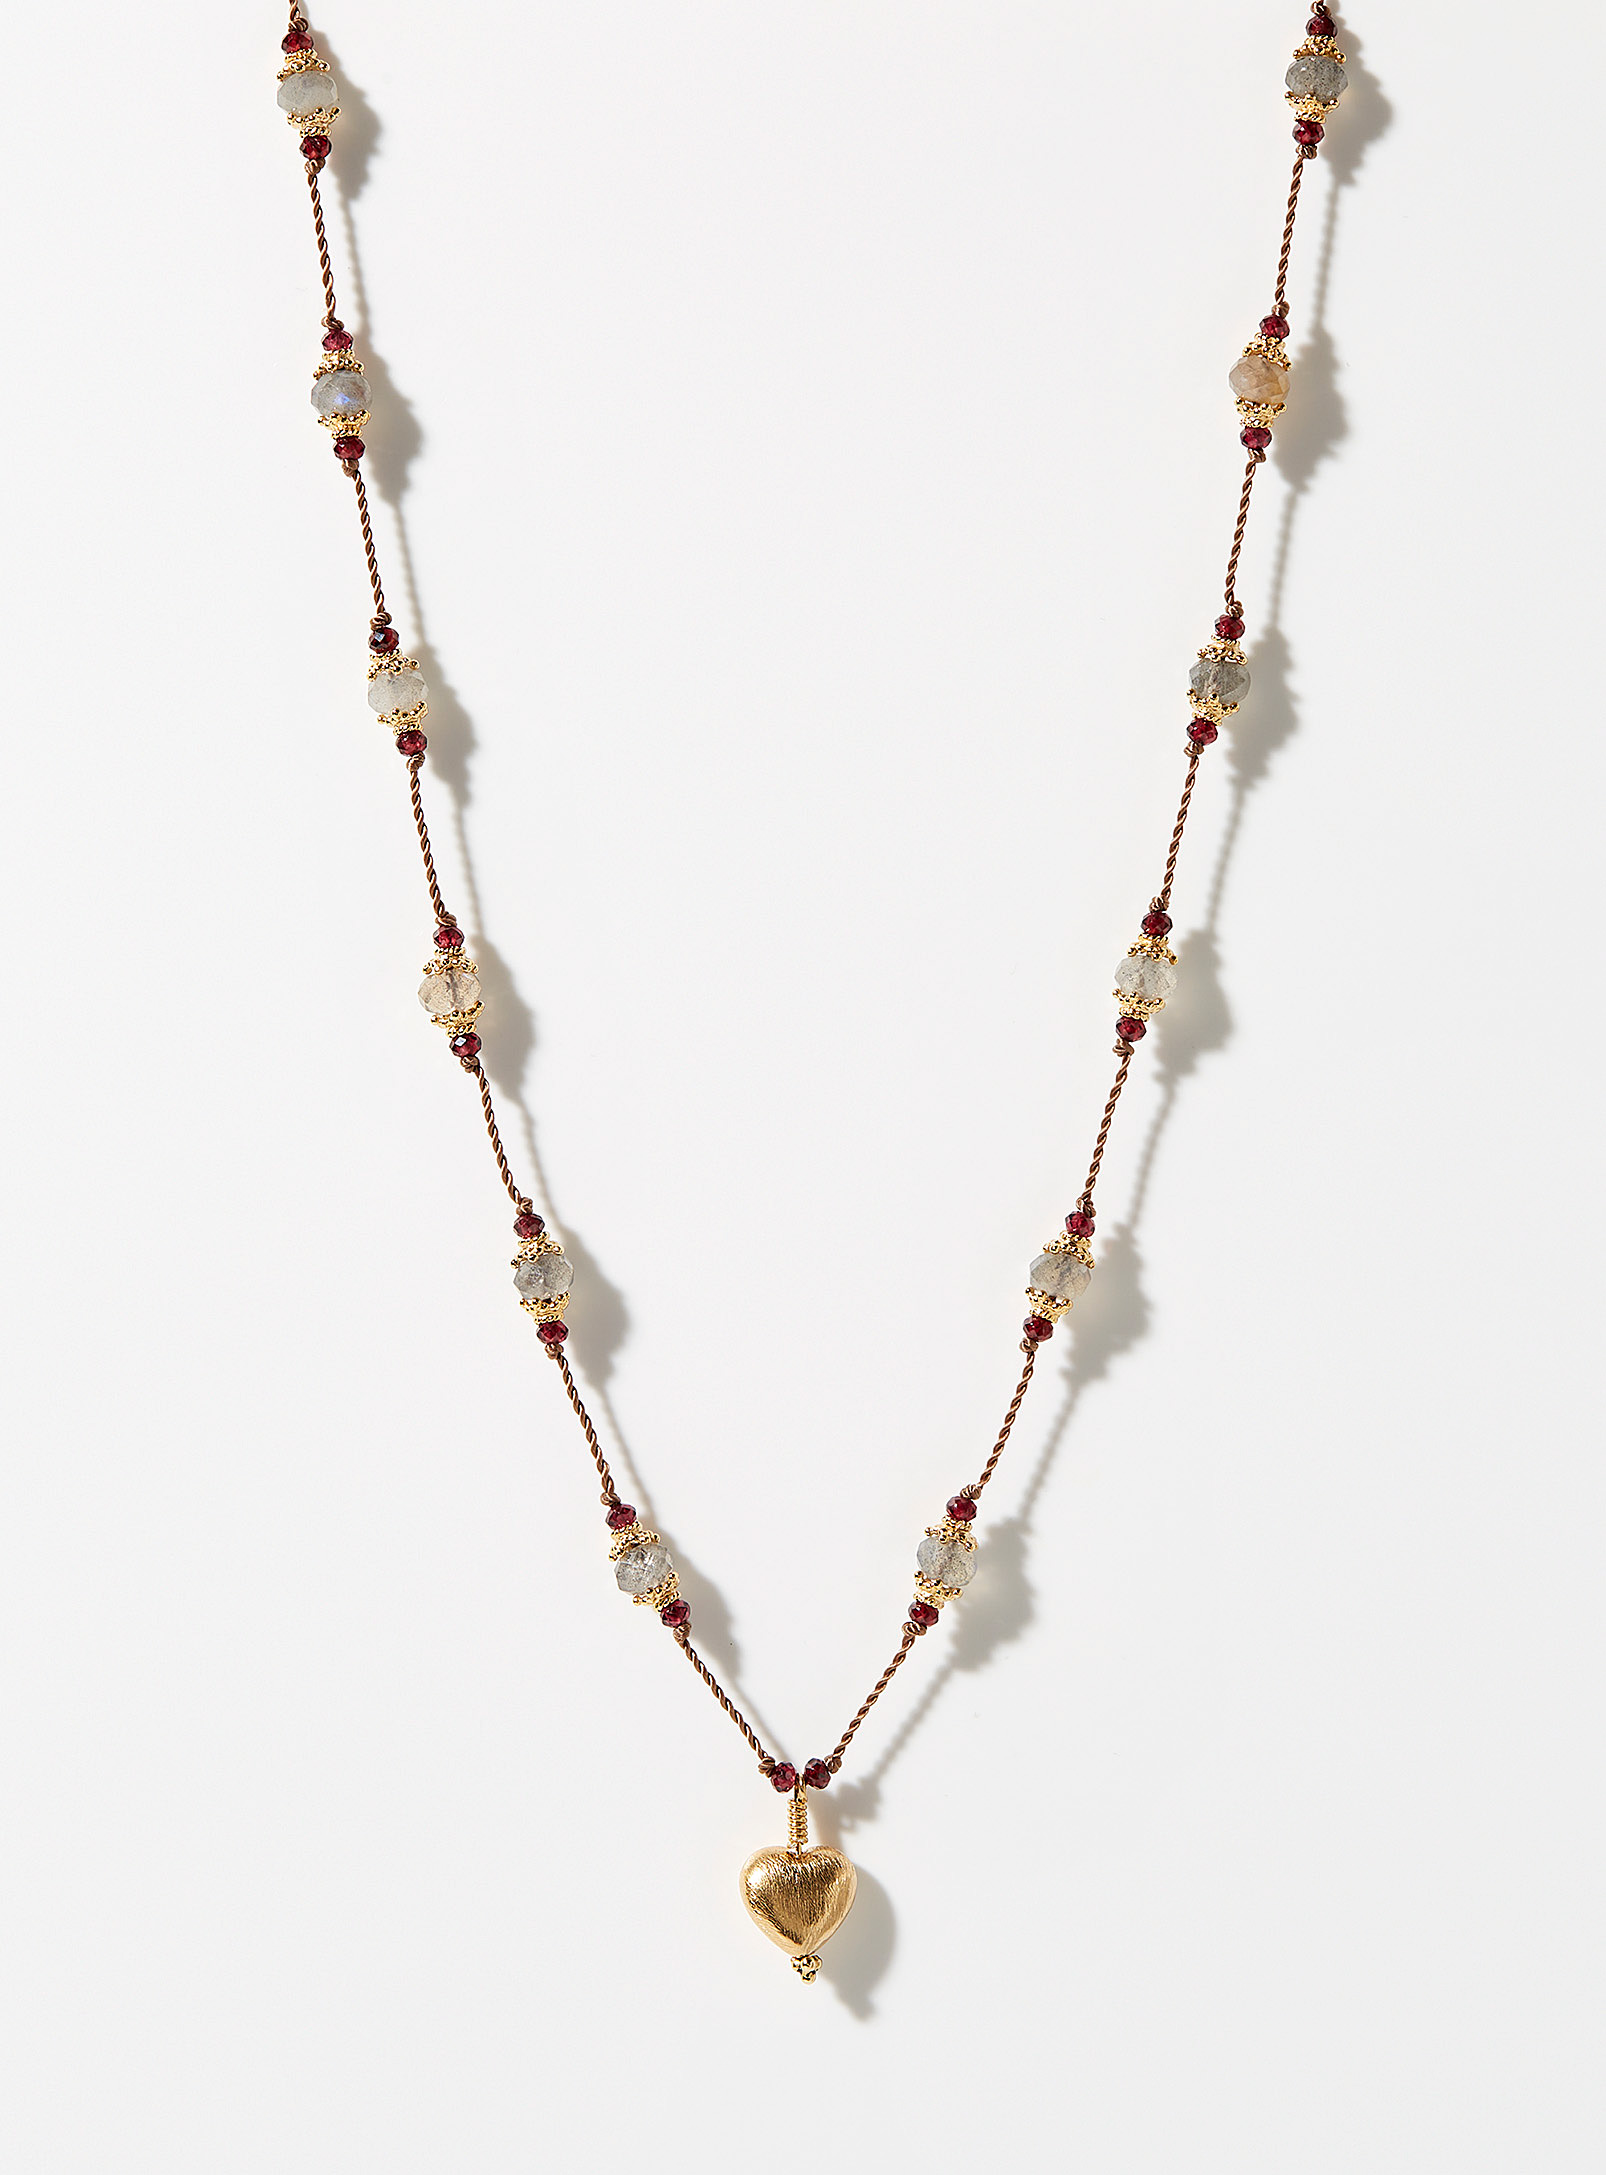 Tityaravy Dil Necklace In Patterned Yellow